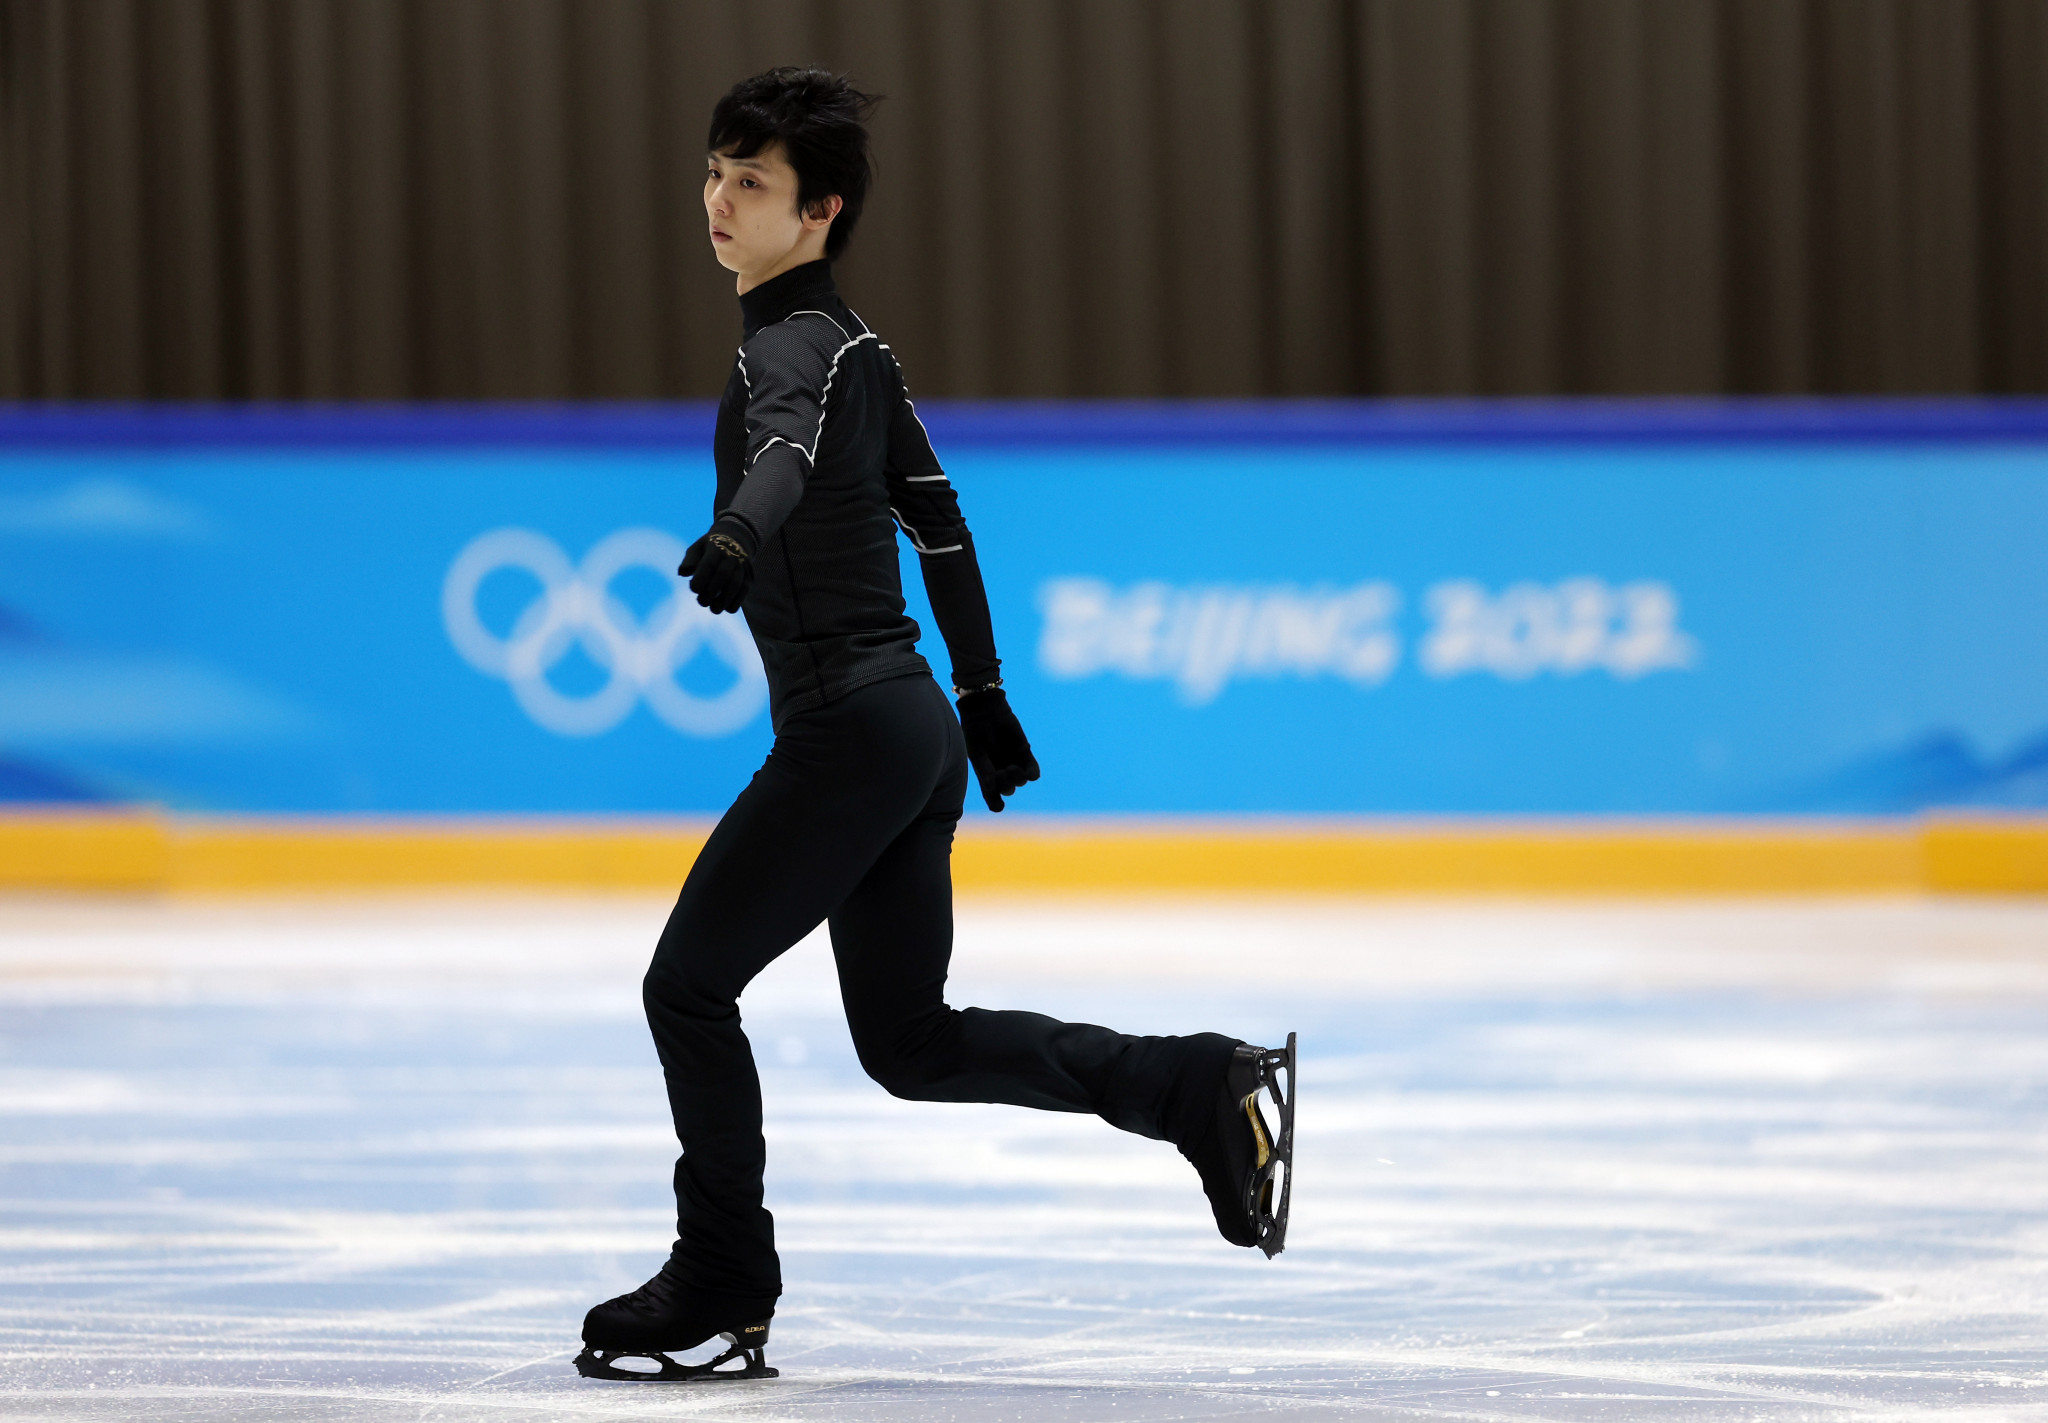 Vincent Zhou had been expected to be among the main rivals of Yuzuru Hanyu, Japan's two-time defending Olympic champion, at Beijing 2022